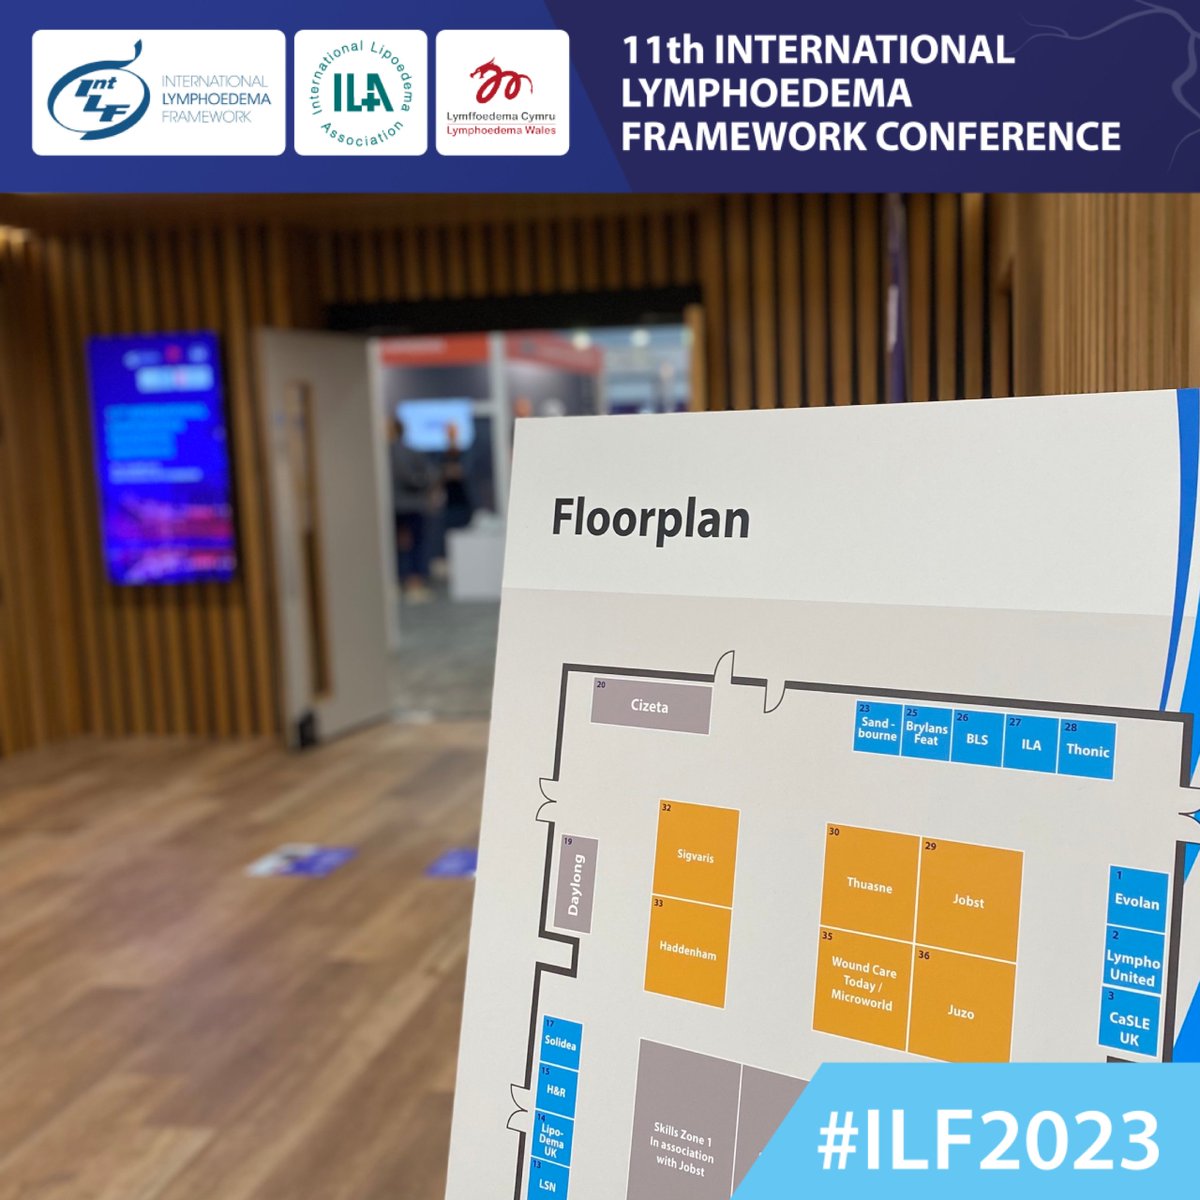 Some brilliant insights shared in the exhibition hall today! Join us for our last day of exhibition and find out what the future of lymphoedema care looks like #ILF2023